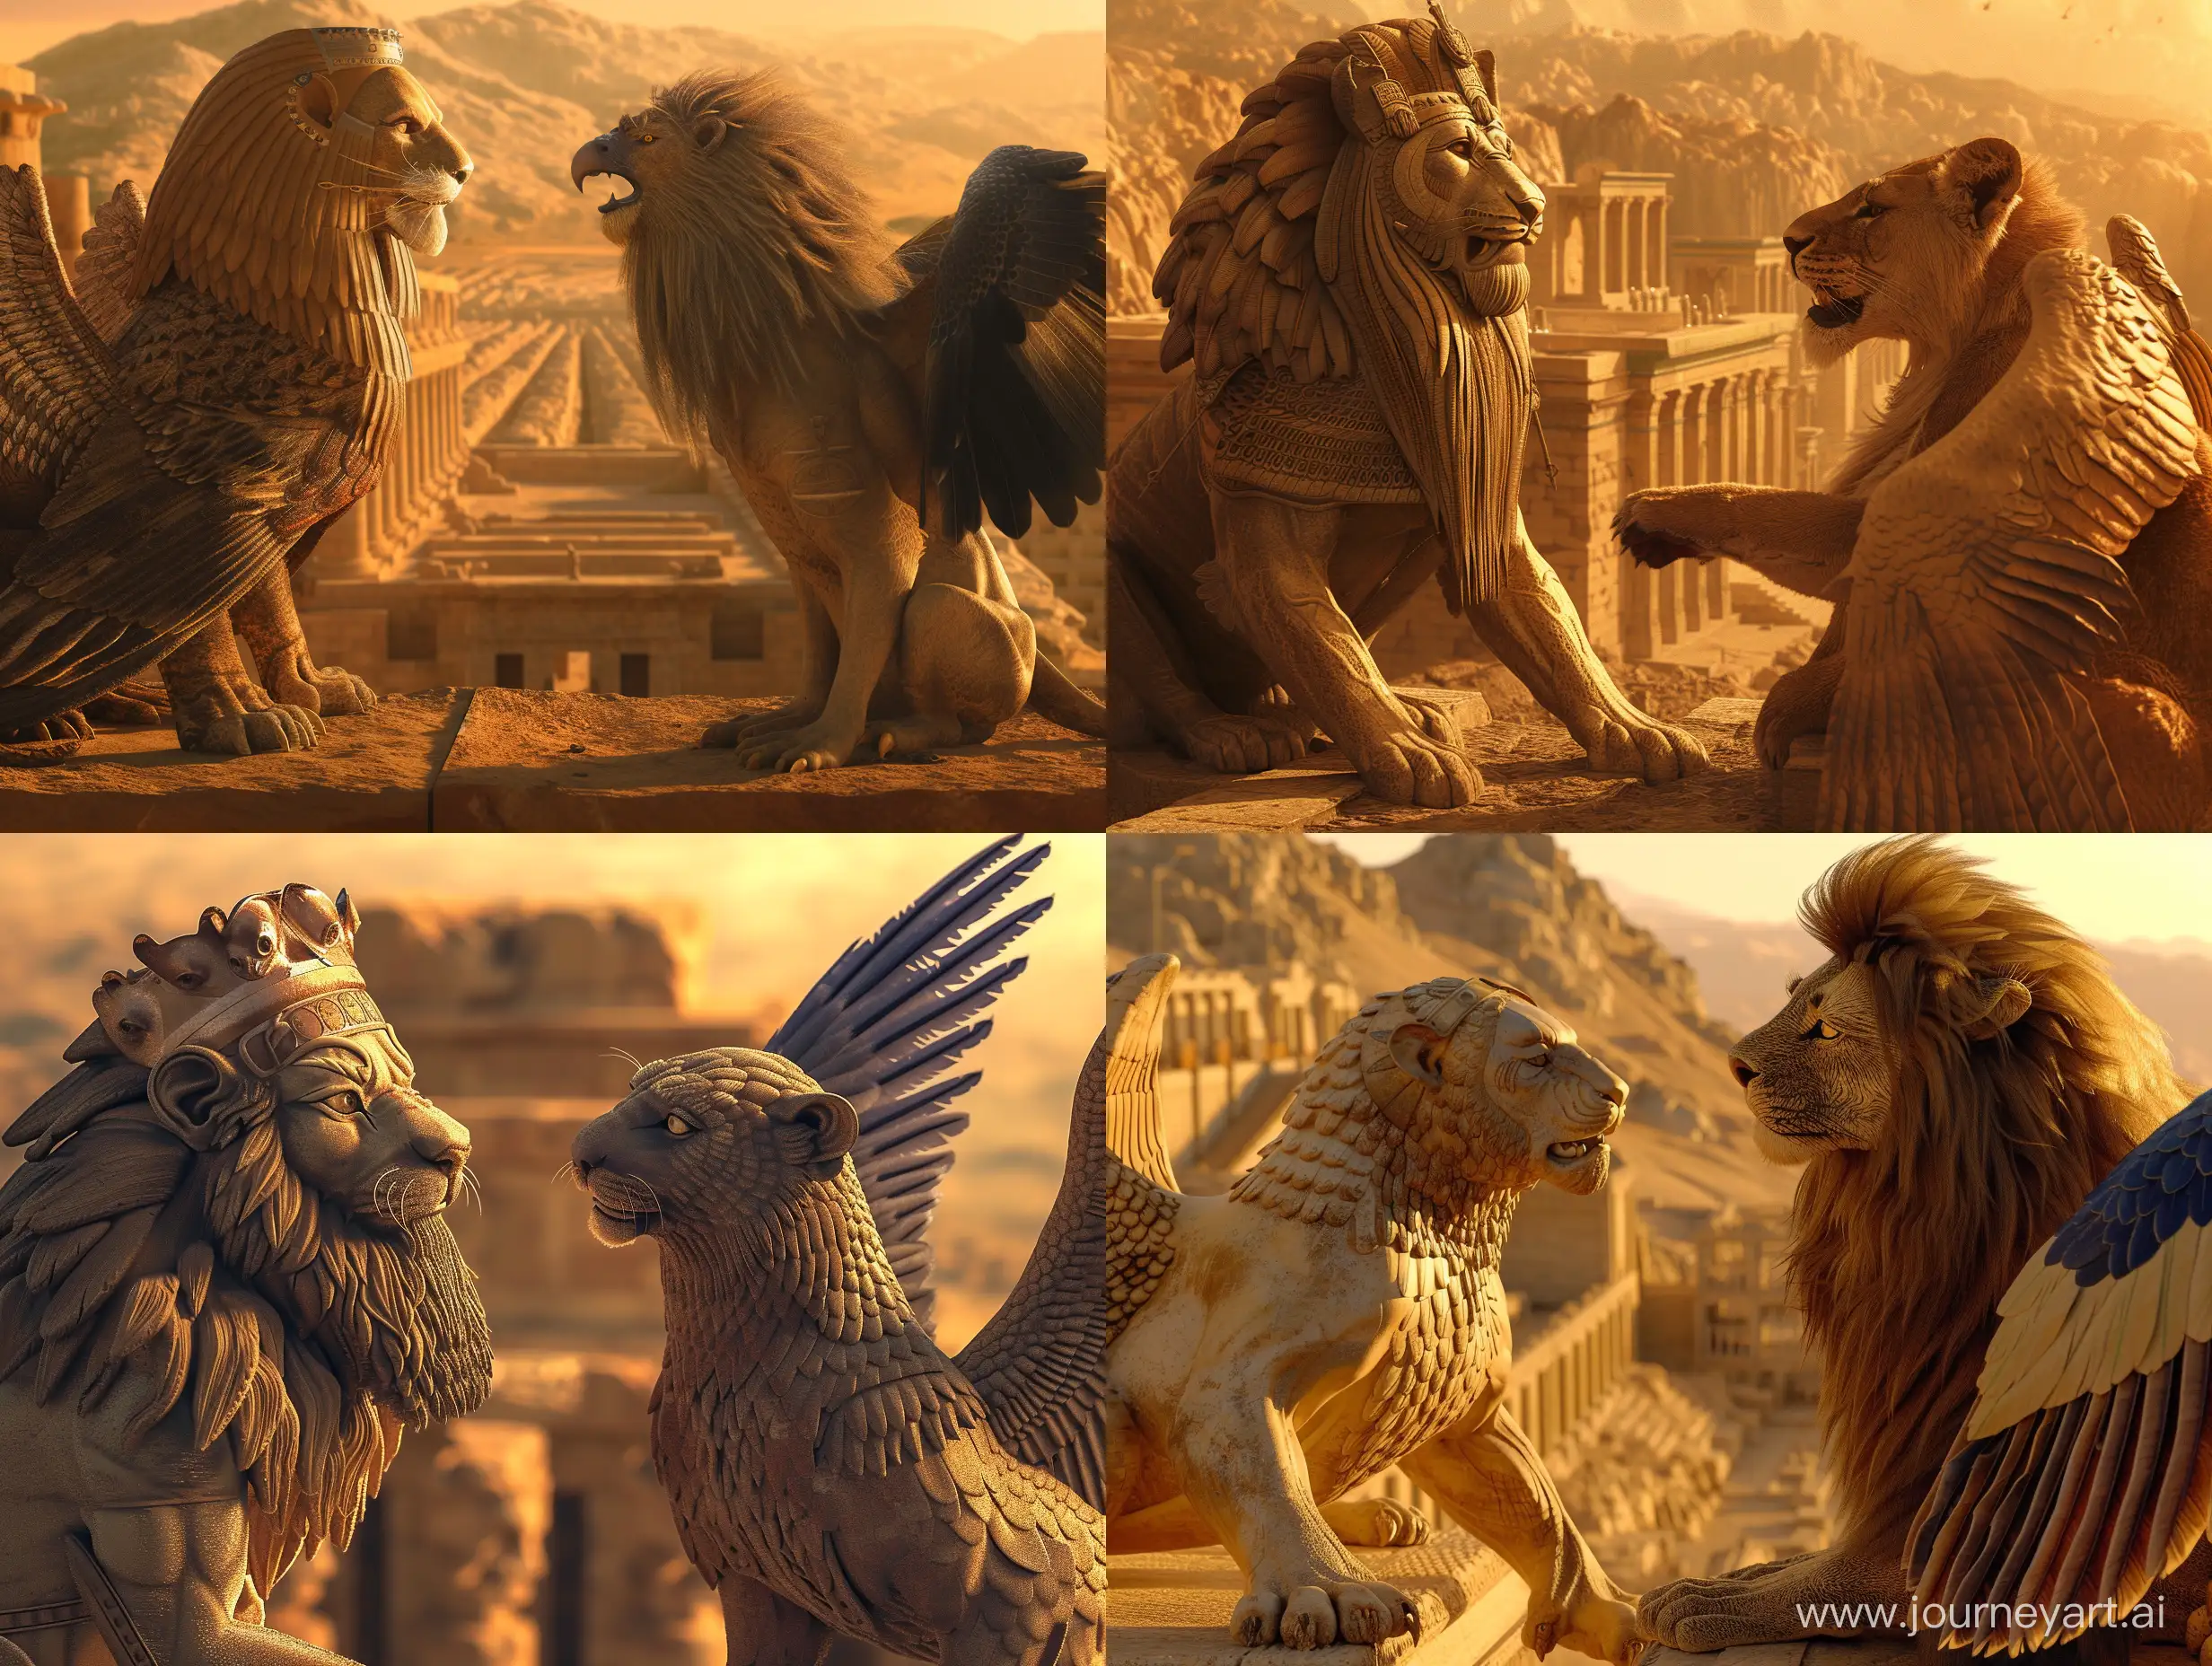 An animal with a head like an Achaemenid human face and a beard king and a lion's body and two wings is talking with an animal whose head is like an eagle's head and the body of that animal is like the body of a lion at Persepolis from the top of a hill in Persepolis. in an ancient civilization, cinematic, epic realism,8K, highly detailed, bird's eye view, golden hour lighting, make a realistic photo.